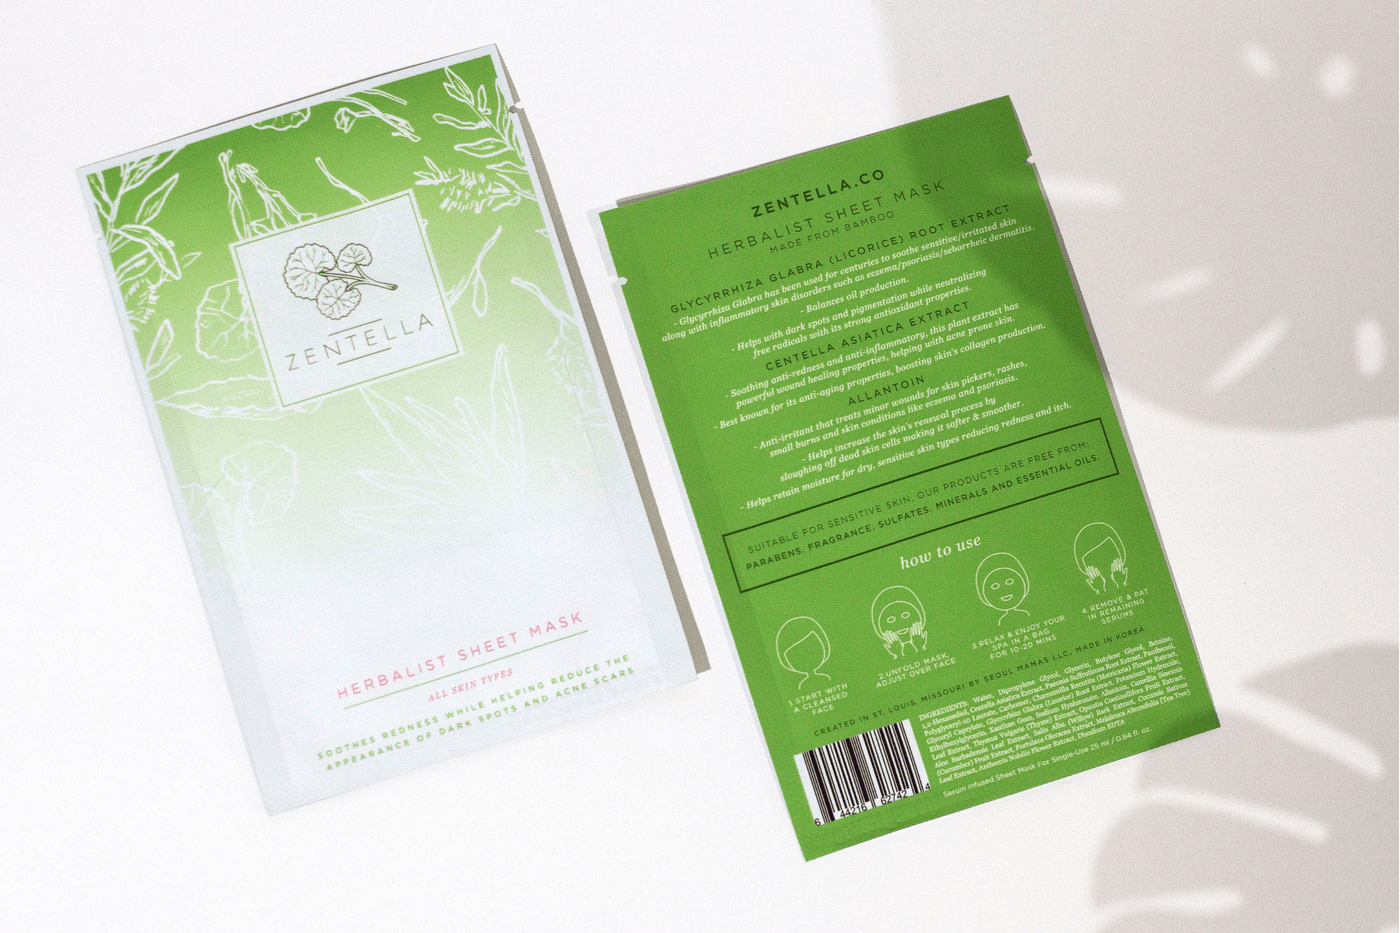 The Herbalist Sheet Mask